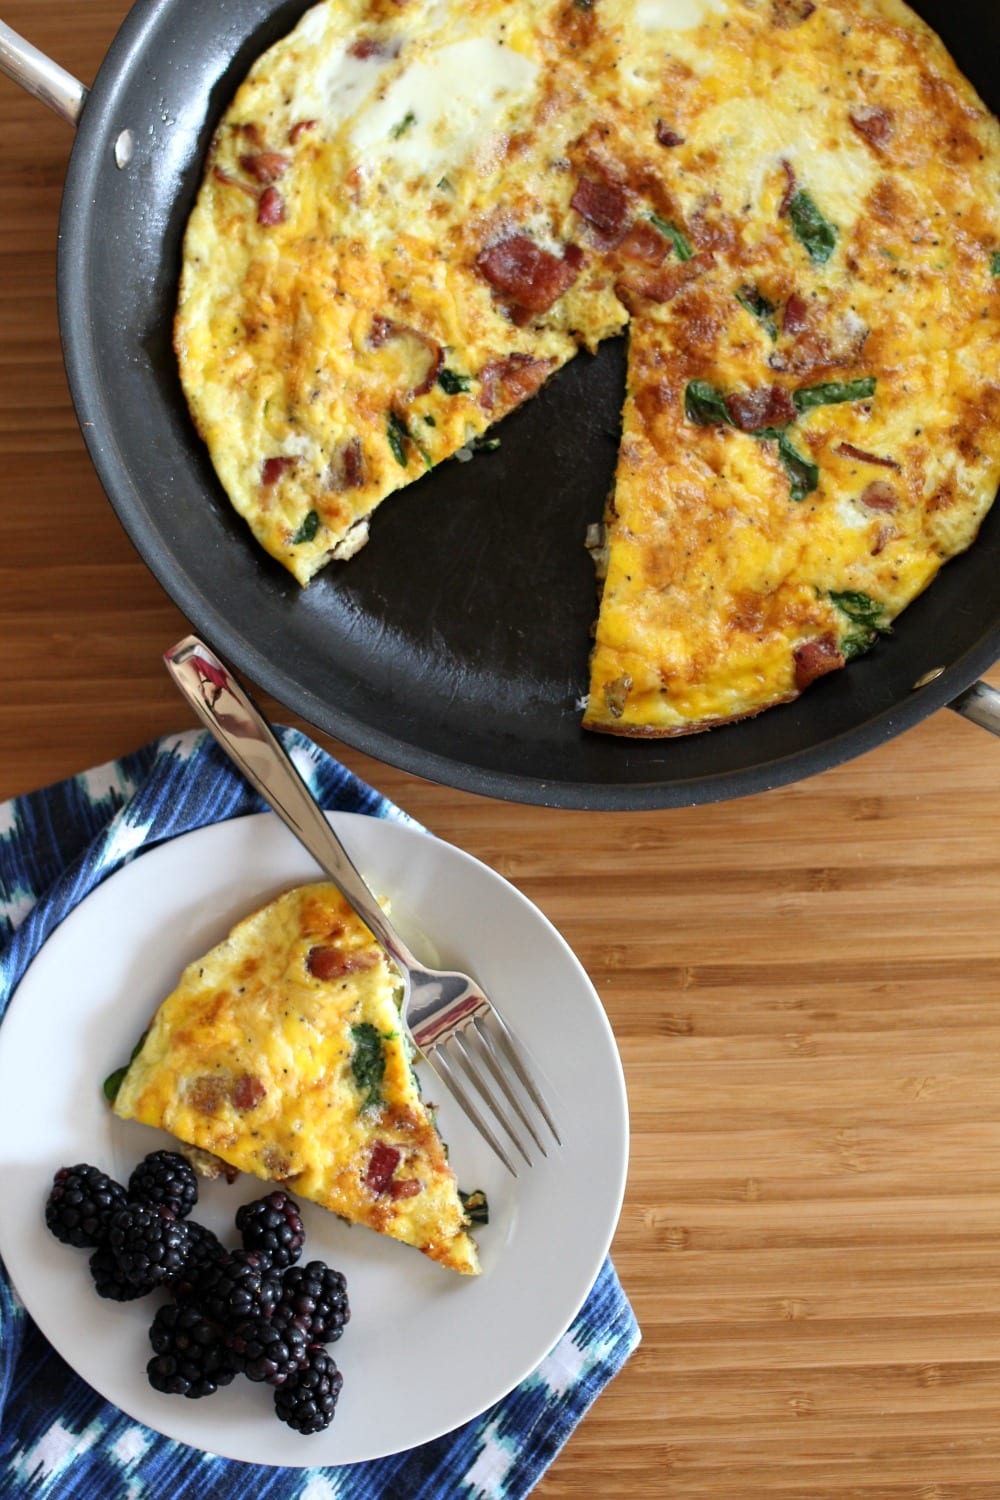 Looking for frittata recipes? This Bacon and Spinach Frittata is perfect for breakfast, lunch or dinner. With ingredients like bacon, fresh spinach and onion, it's full of flavor and a complete meal. Just add some fresh fruit and you're good to go!